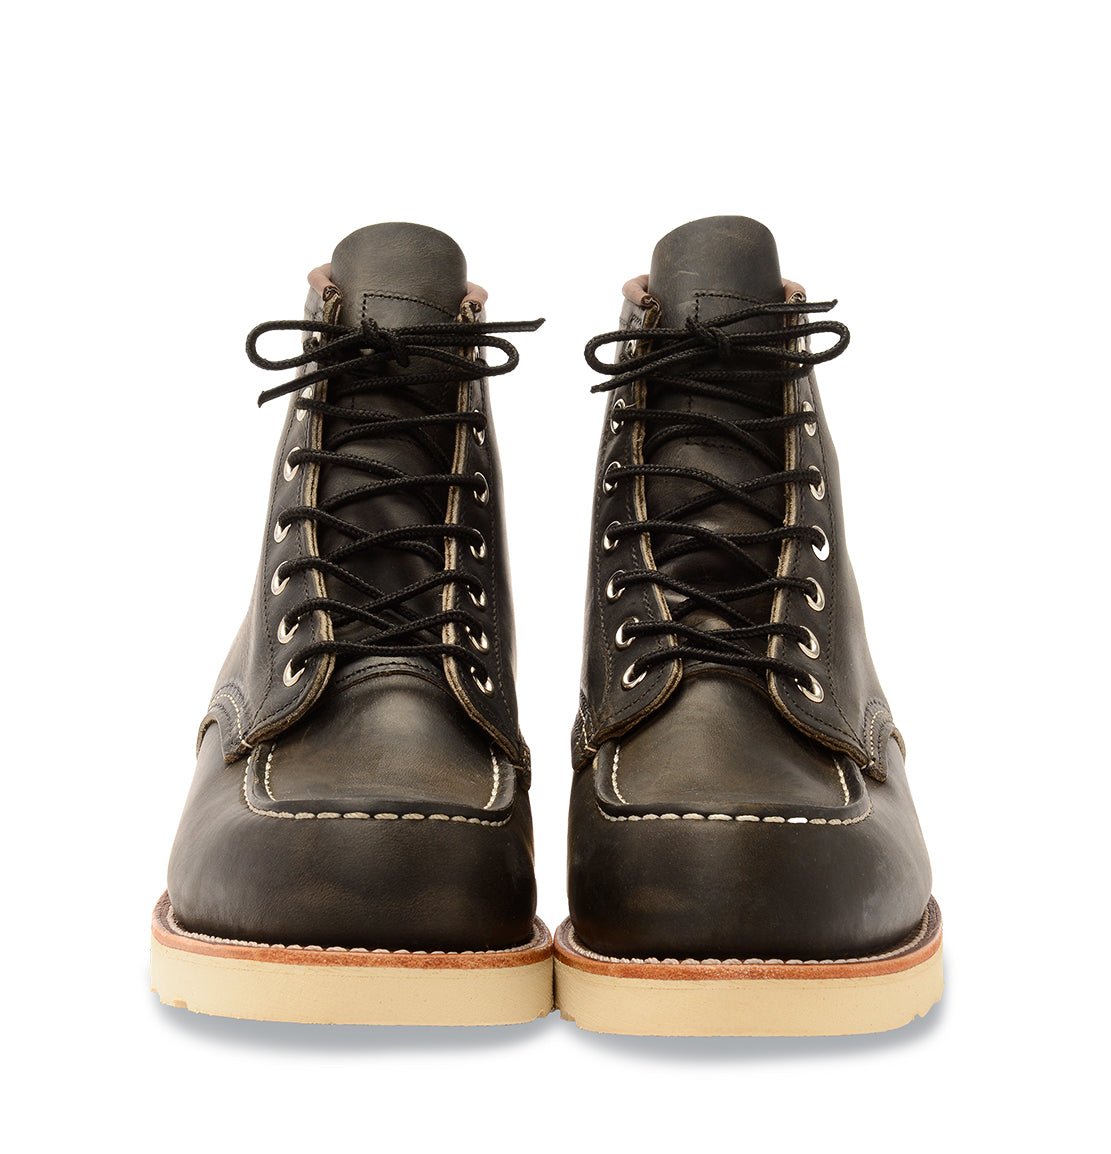 redwing boots leicester